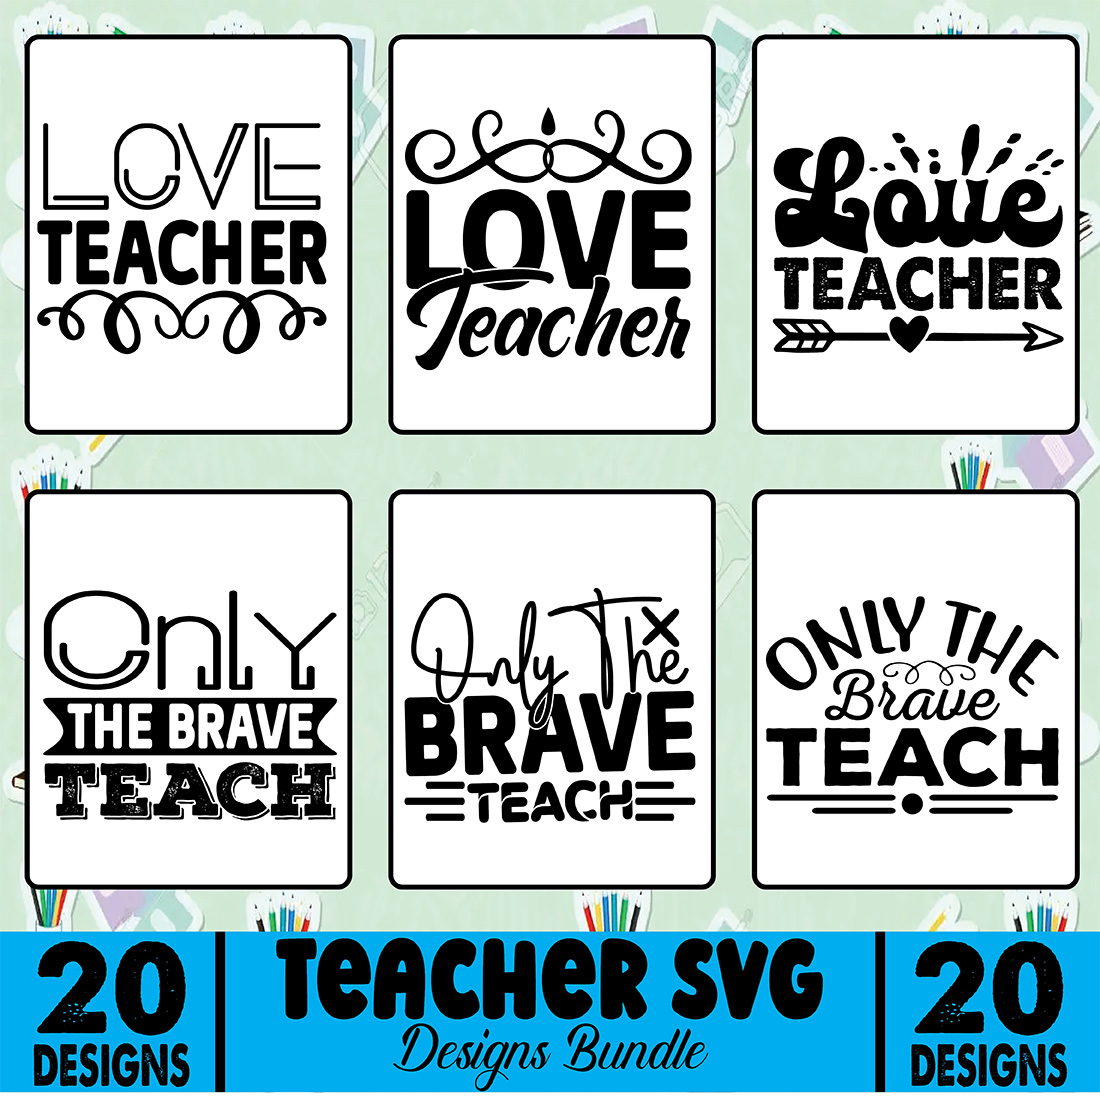 A set of amazing images for prints on the theme of the teacher